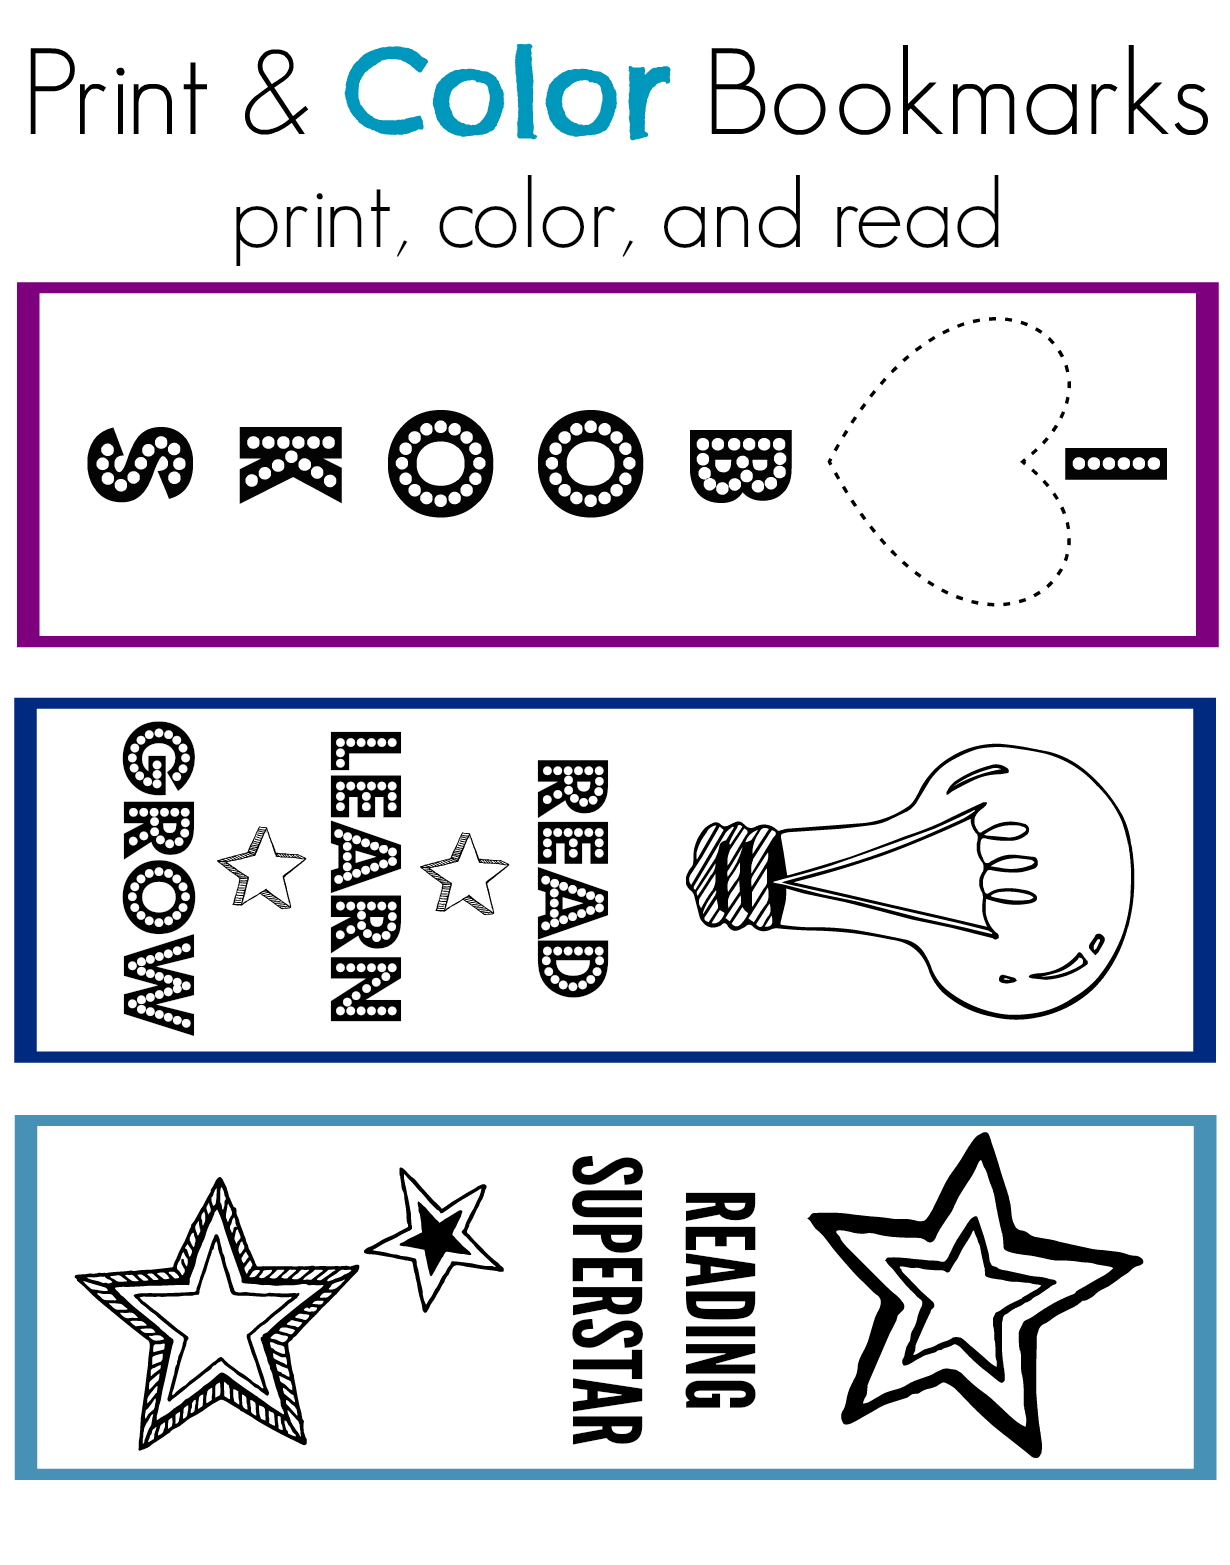 7 Best Images of Dork Diaries Books For Bookmarks Printable Library